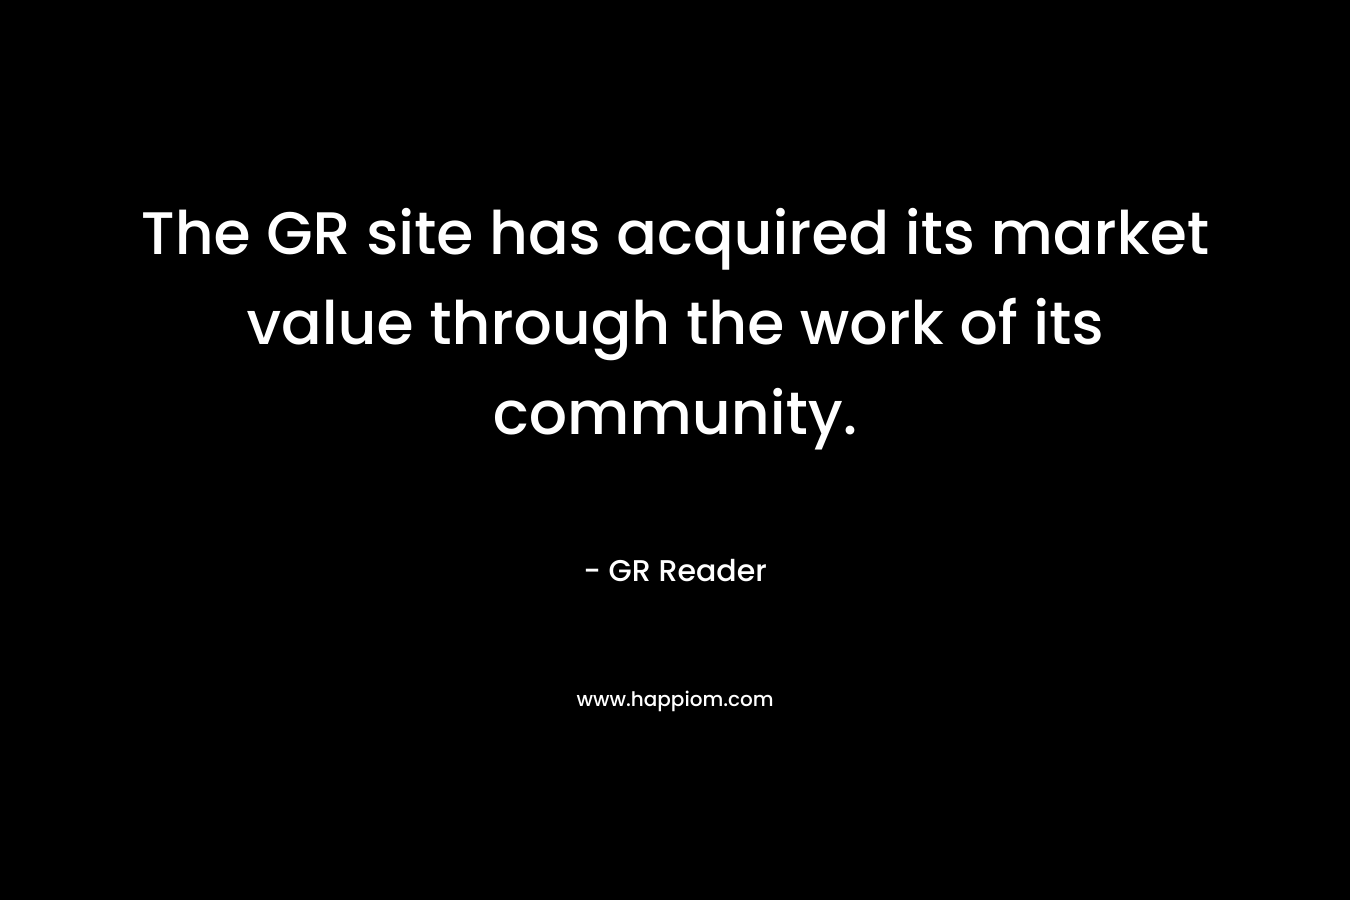 The GR site has acquired its market value through the work of its community. – GR Reader